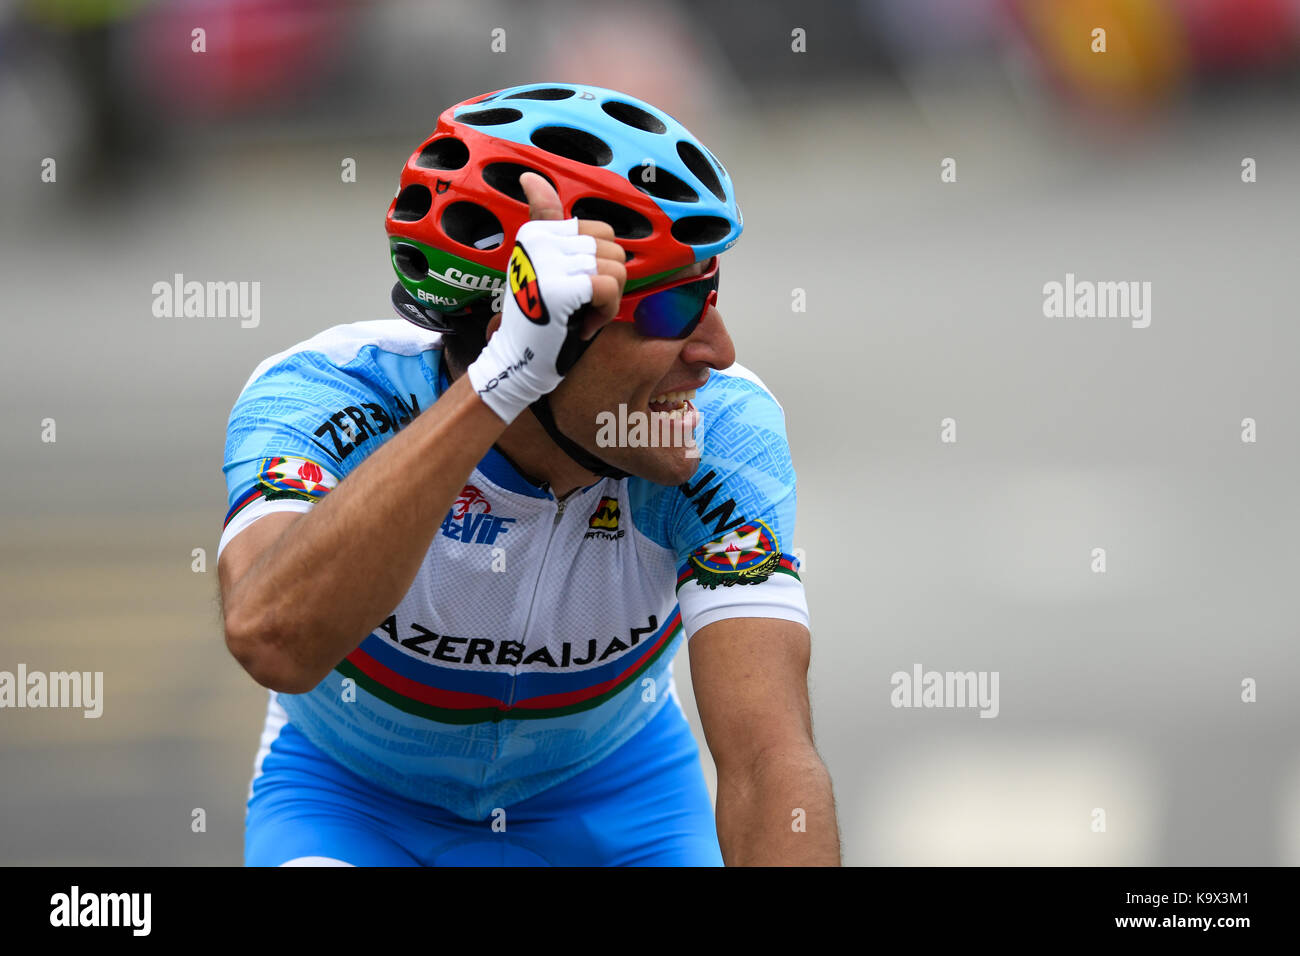 Bergen, Norway. 24th September, 2017. Elchin Asadov (Azerbaijan) was part of the early ten men breakway group. As the group got reeled in and the breakaway riders struggled with the peloton pace, and got dropped. Elchin Asadov was still all smiles and thanked the specatators along the course, before he abandoned the race for a DNF. Credit: Kjell Eirik Irgens Henanger/Alamy Live News Stock Photo